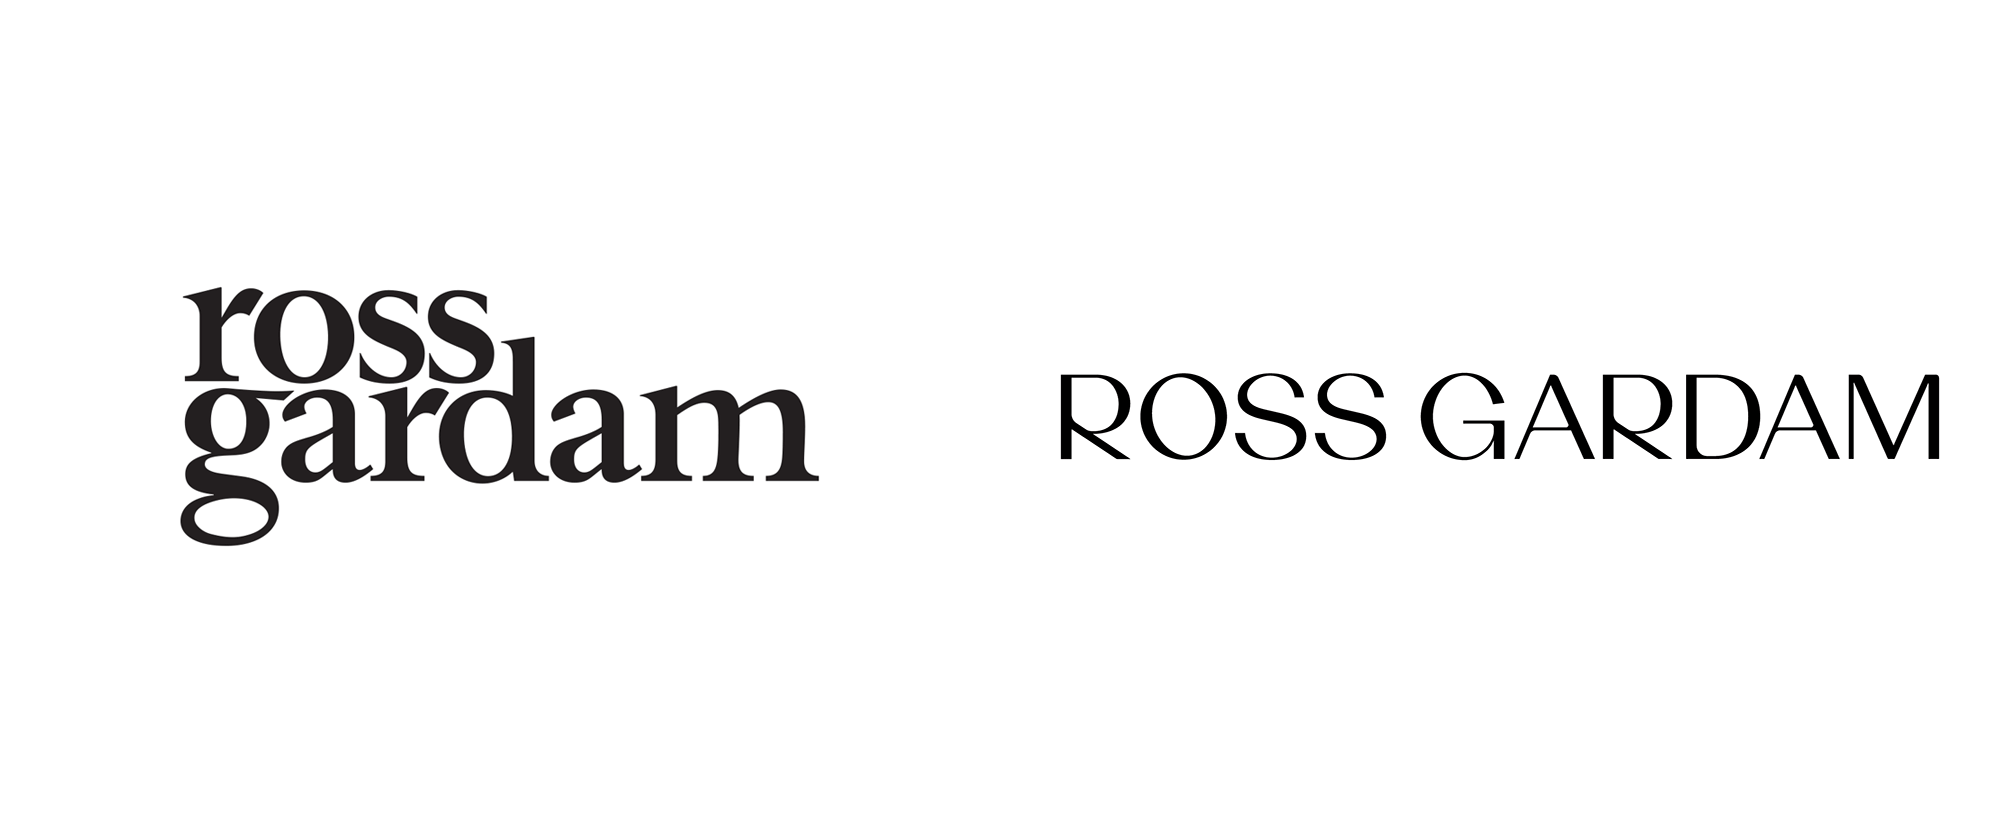 New Logo and Identity for Ross Gardam by SouthSouthwest